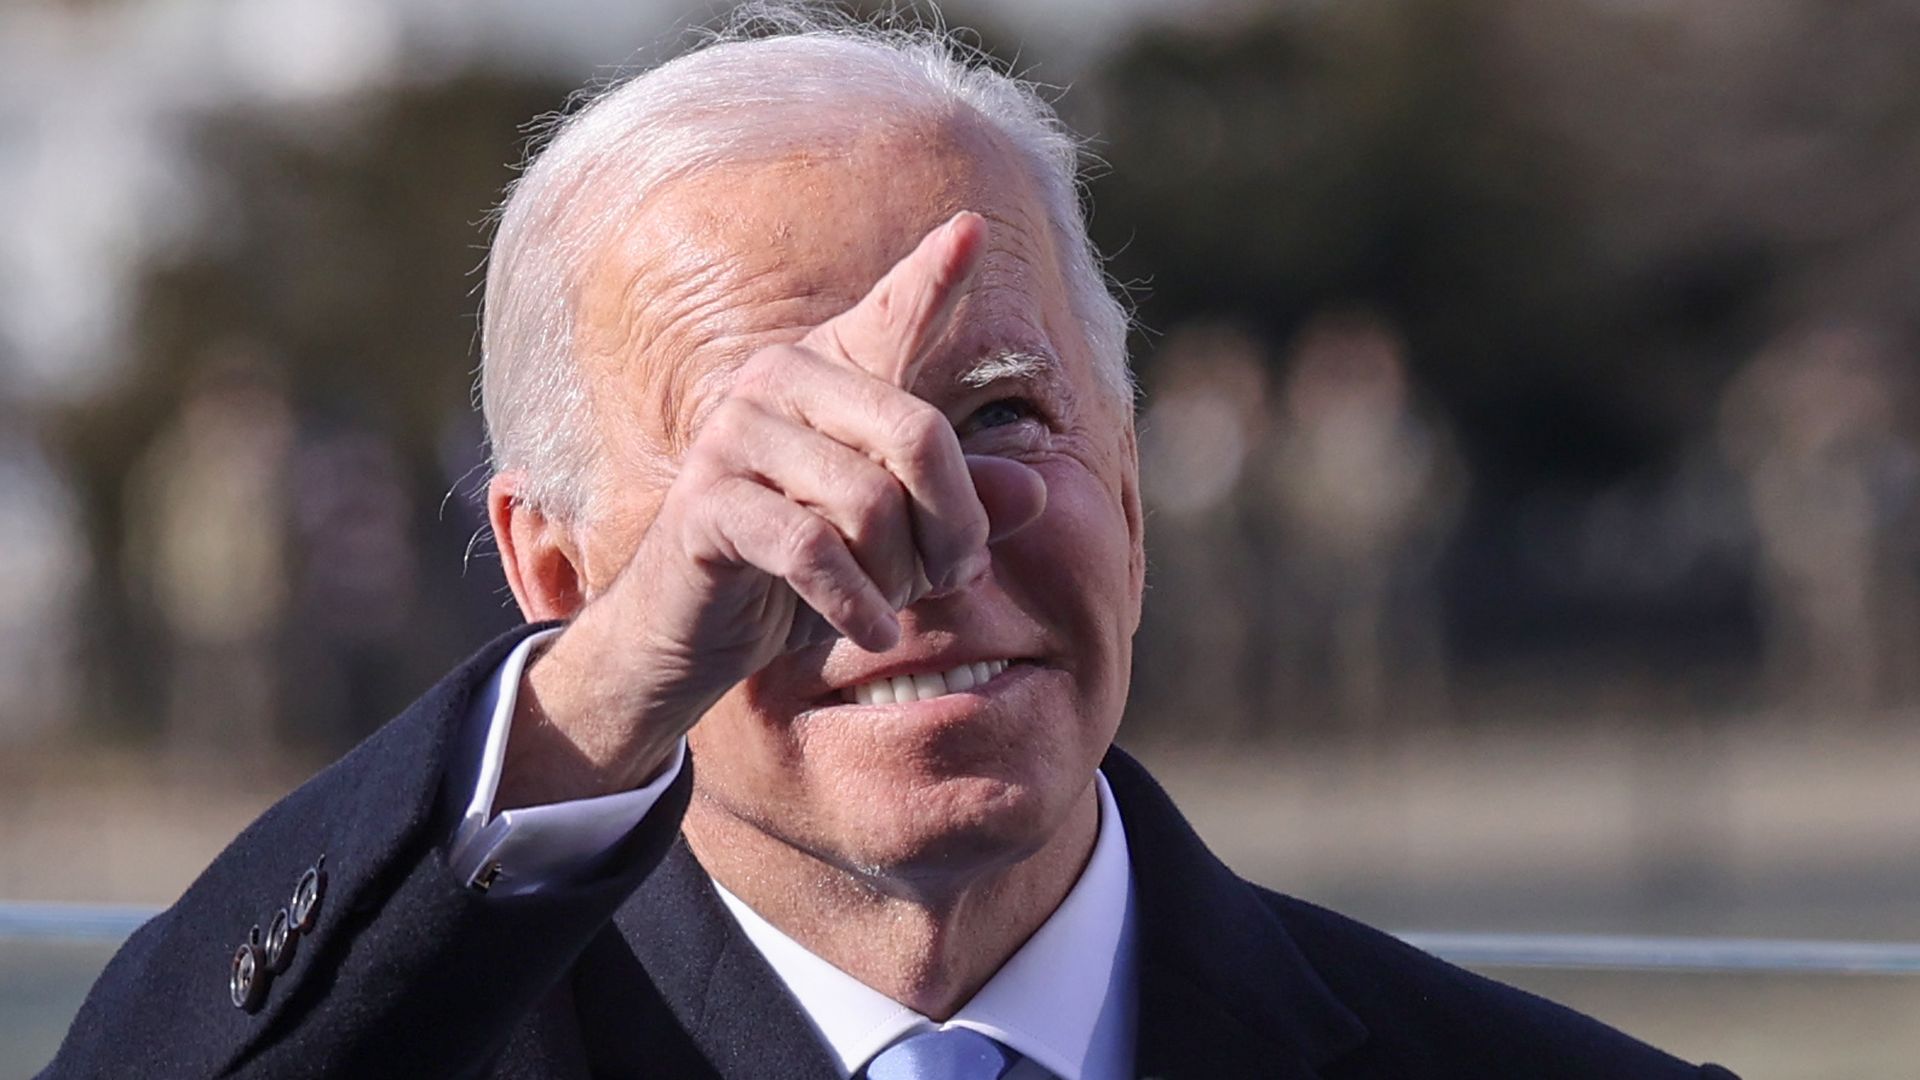 U.S. President Joe Biden gestures during the inauguration ceremony on the West Front of the U.S. Capitol on January 20, 2021 in Washington, DC.